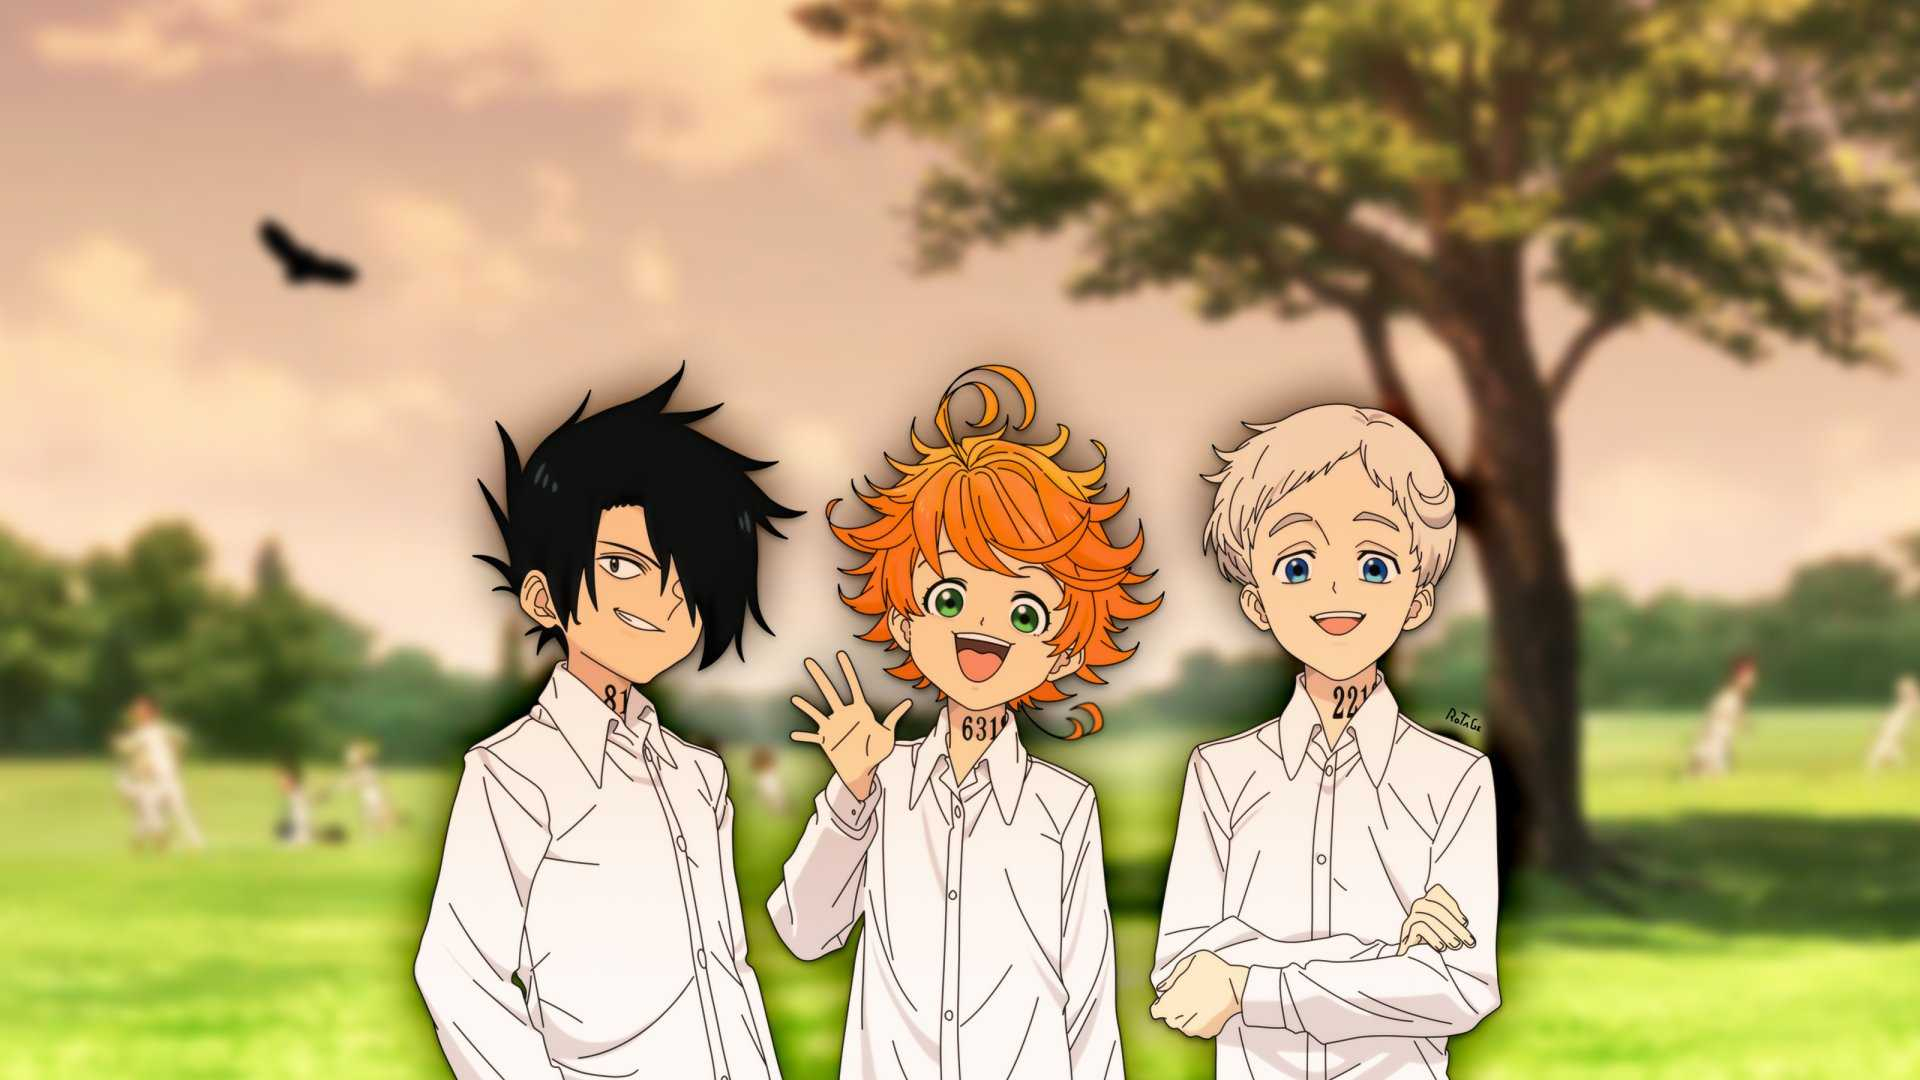 1920x1080 Wallpaper Promised Neverland Awesome Free HD Wallpapers